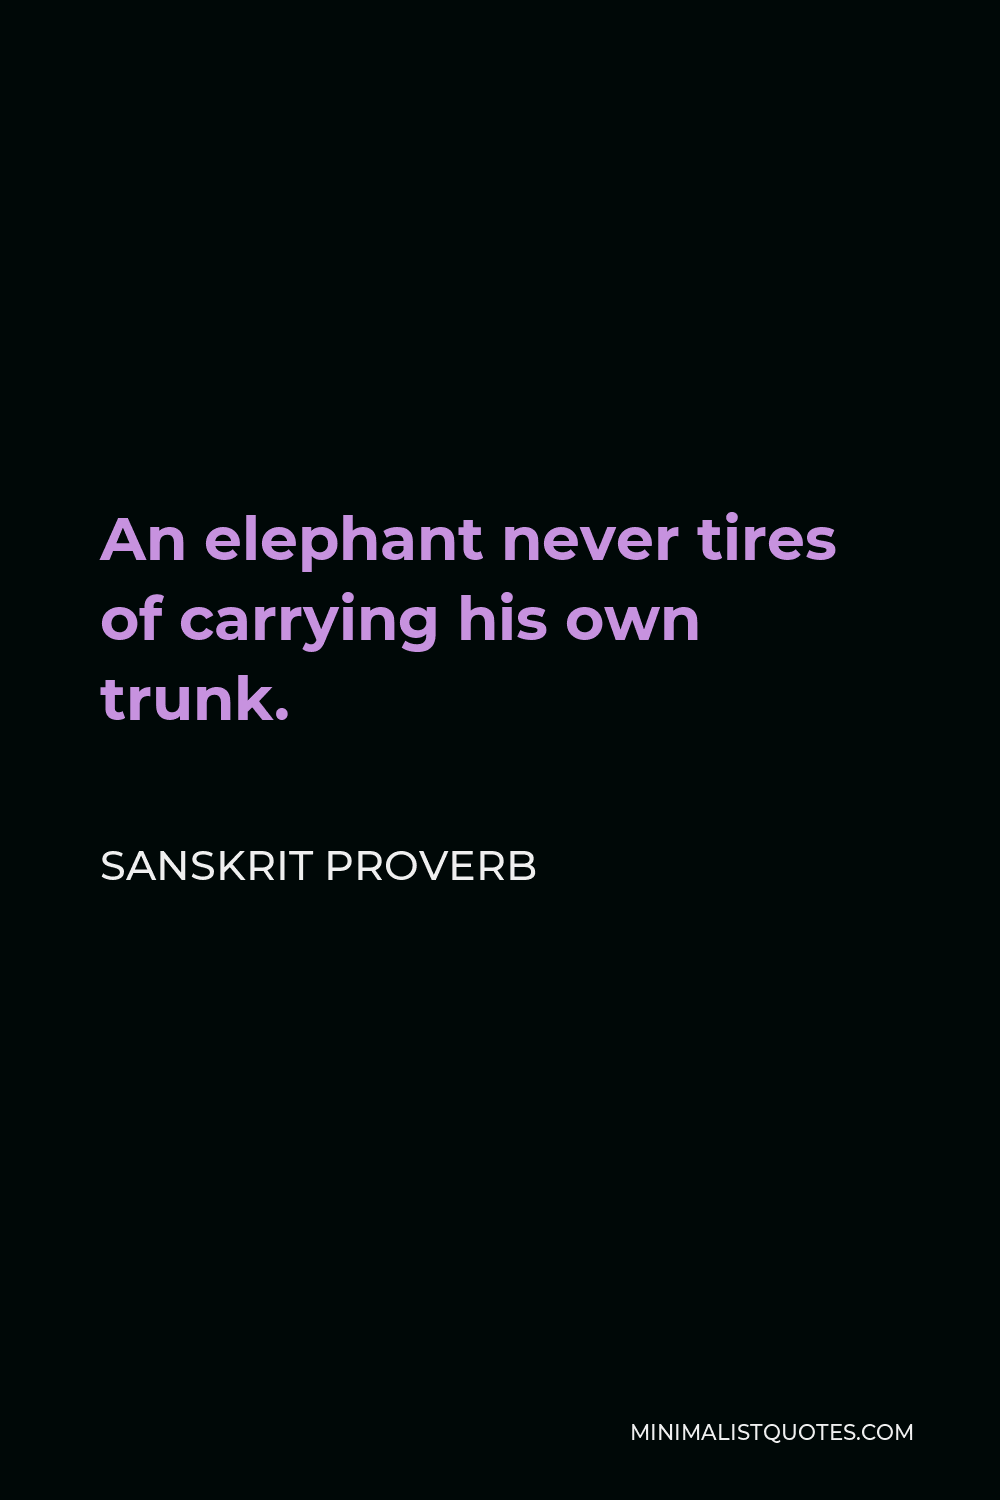 Sanskrit Proverb Quote - An elephant never tires of carrying his own trunk.